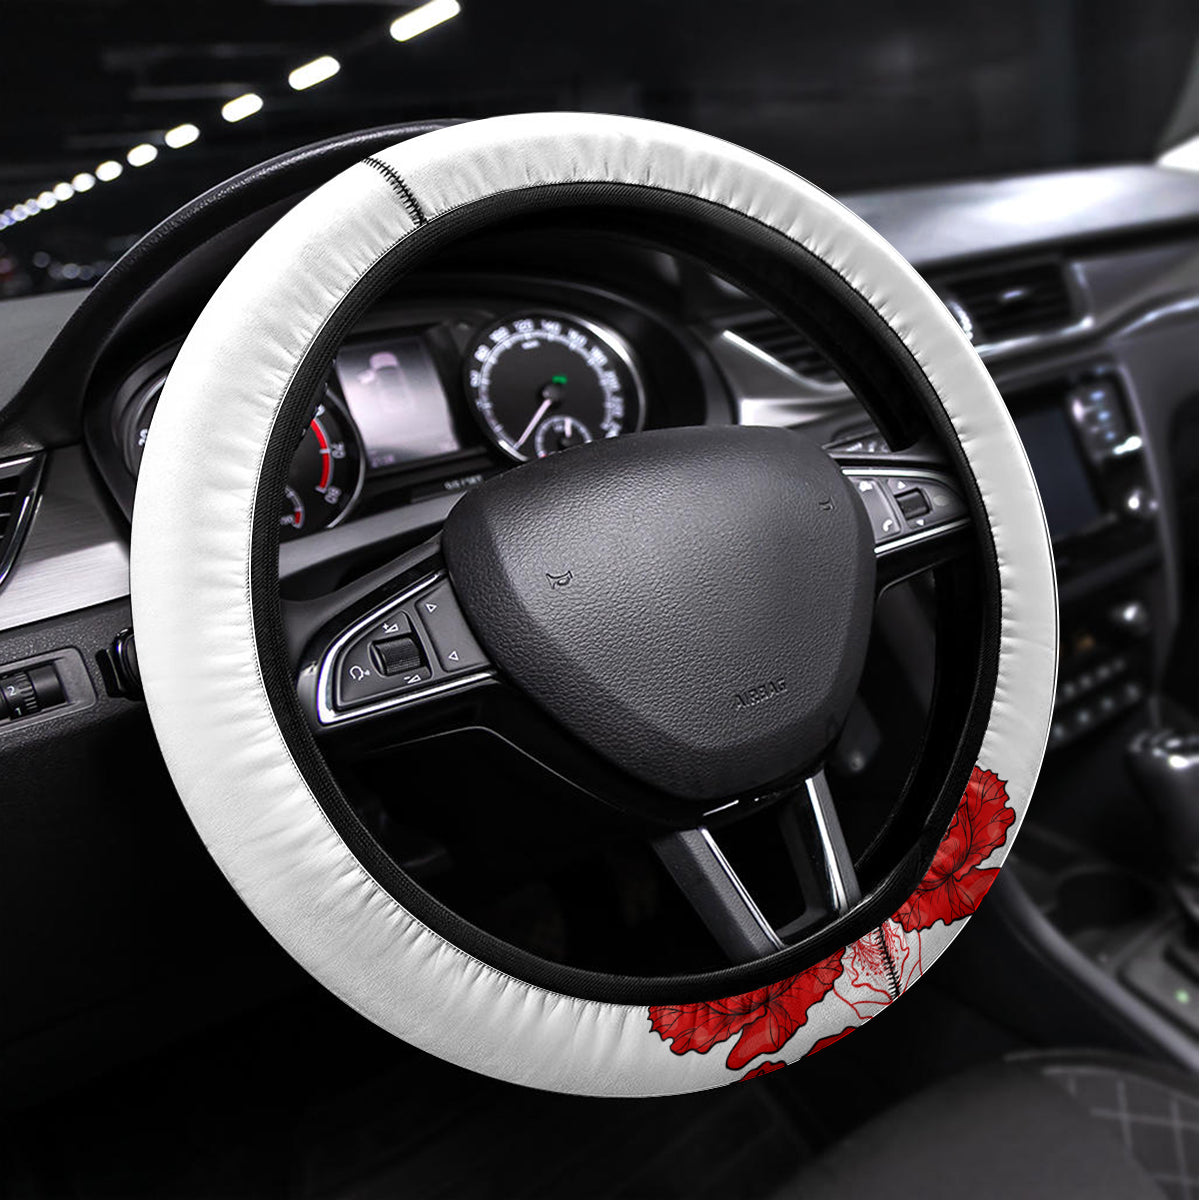 Tokelau ANZAC Day Steering Wheel Cover Lest We Forget Red Poppy Flowers and Soldier LT03 Universal Fit White - Polynesian Pride